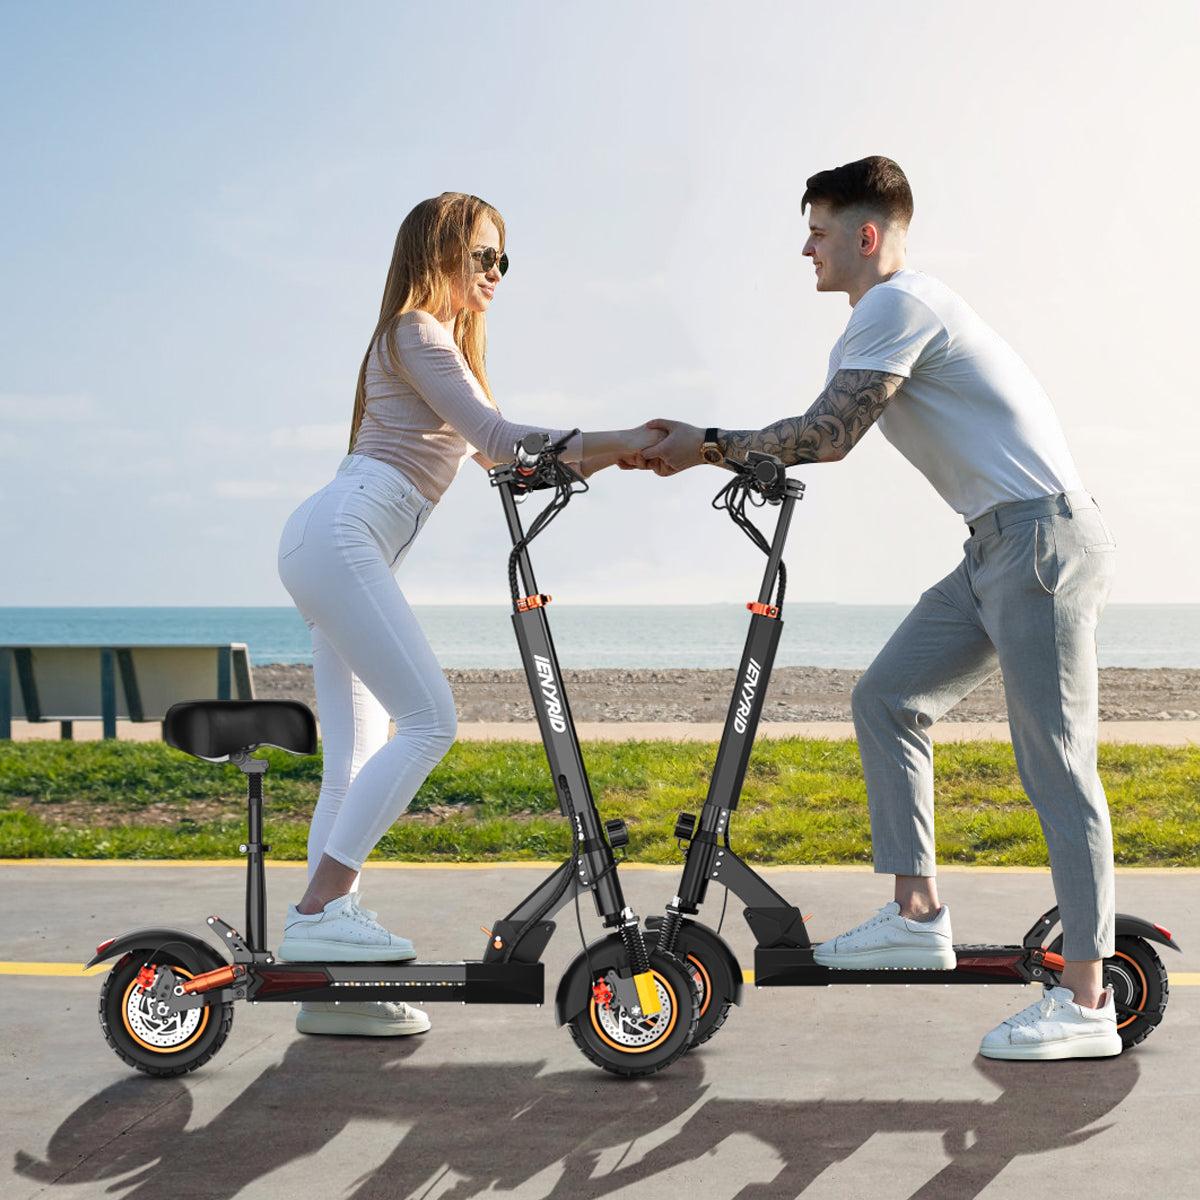 iENYRID M4 Pro S+ Max 800W Electric Scooter, 48V 20Ah Battery, 45km/h Speed, Long Range 60km, Max Load 150kg